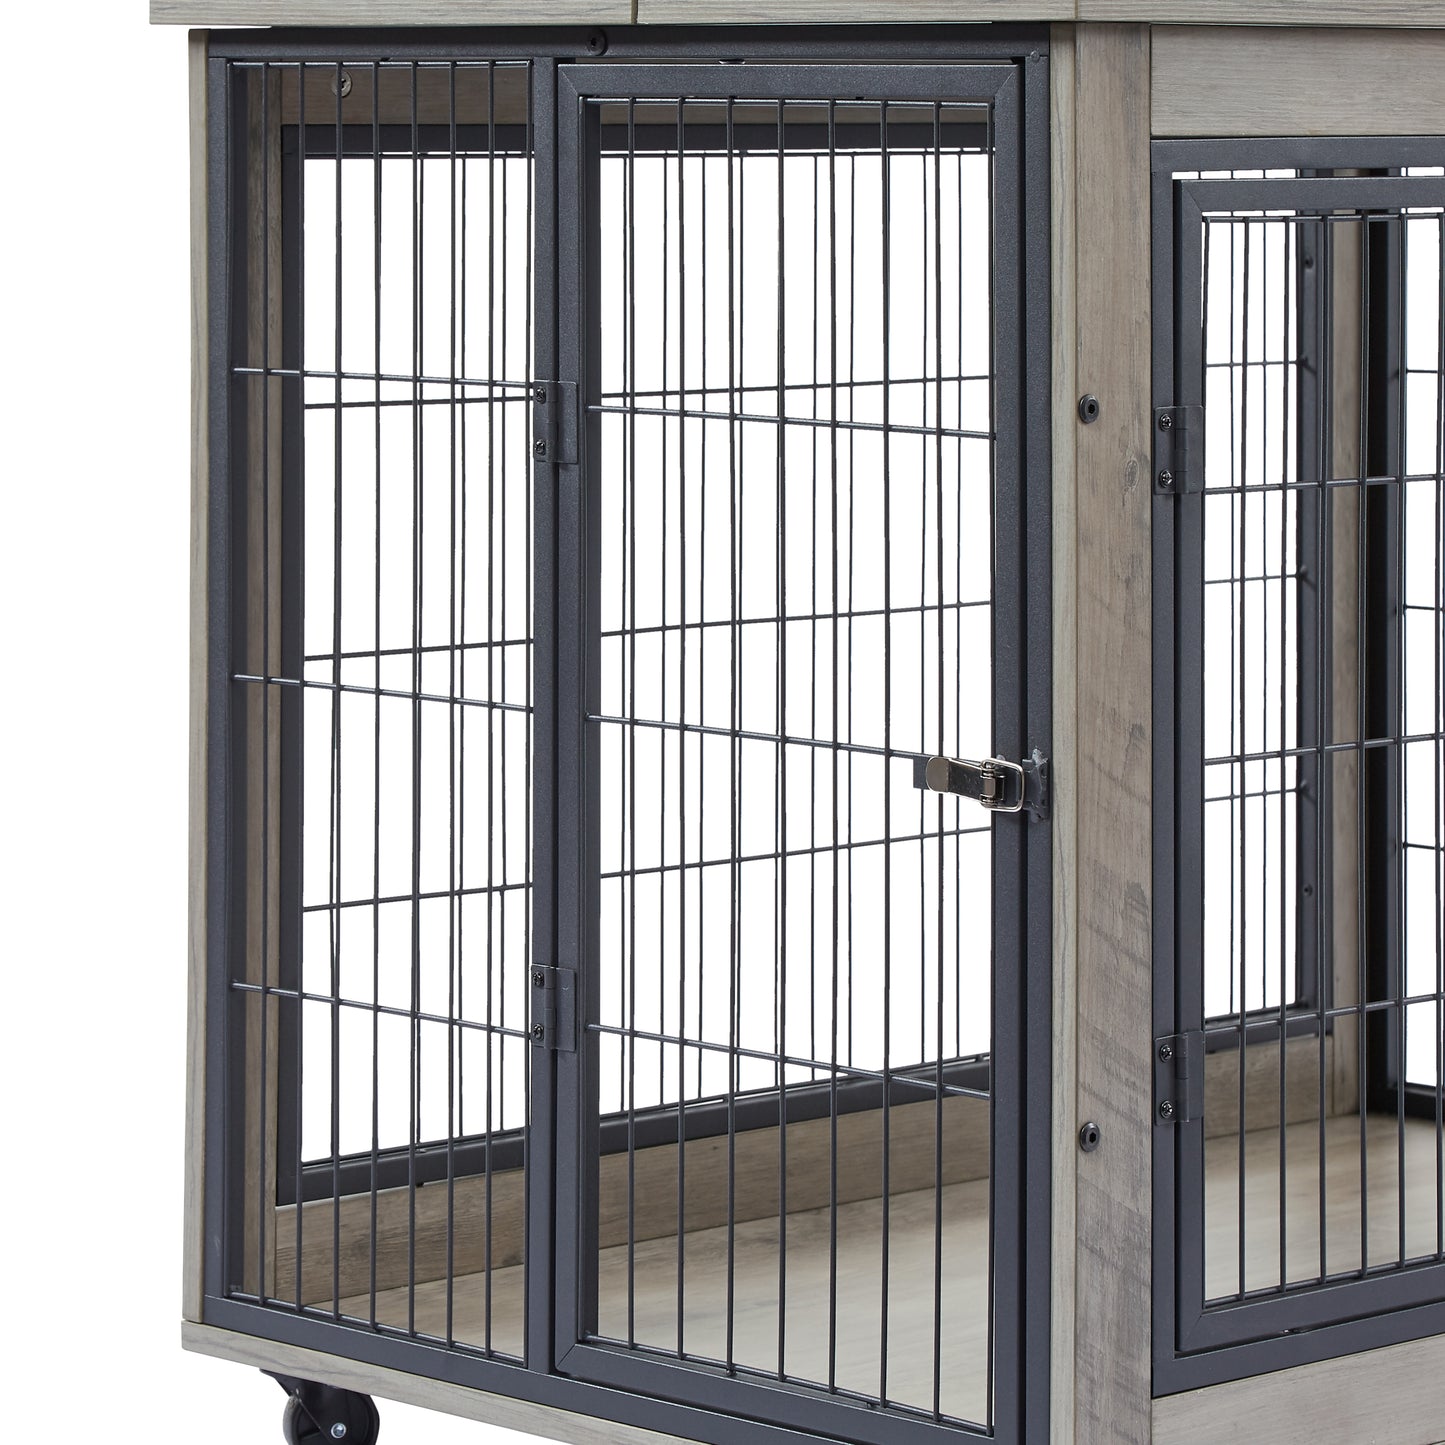 Furniture Style Dog Crate Side Table on Wheels with Double Doors and Lift Top.（Grey,38.58’’w x 25.5’’d x 27.36’’h）